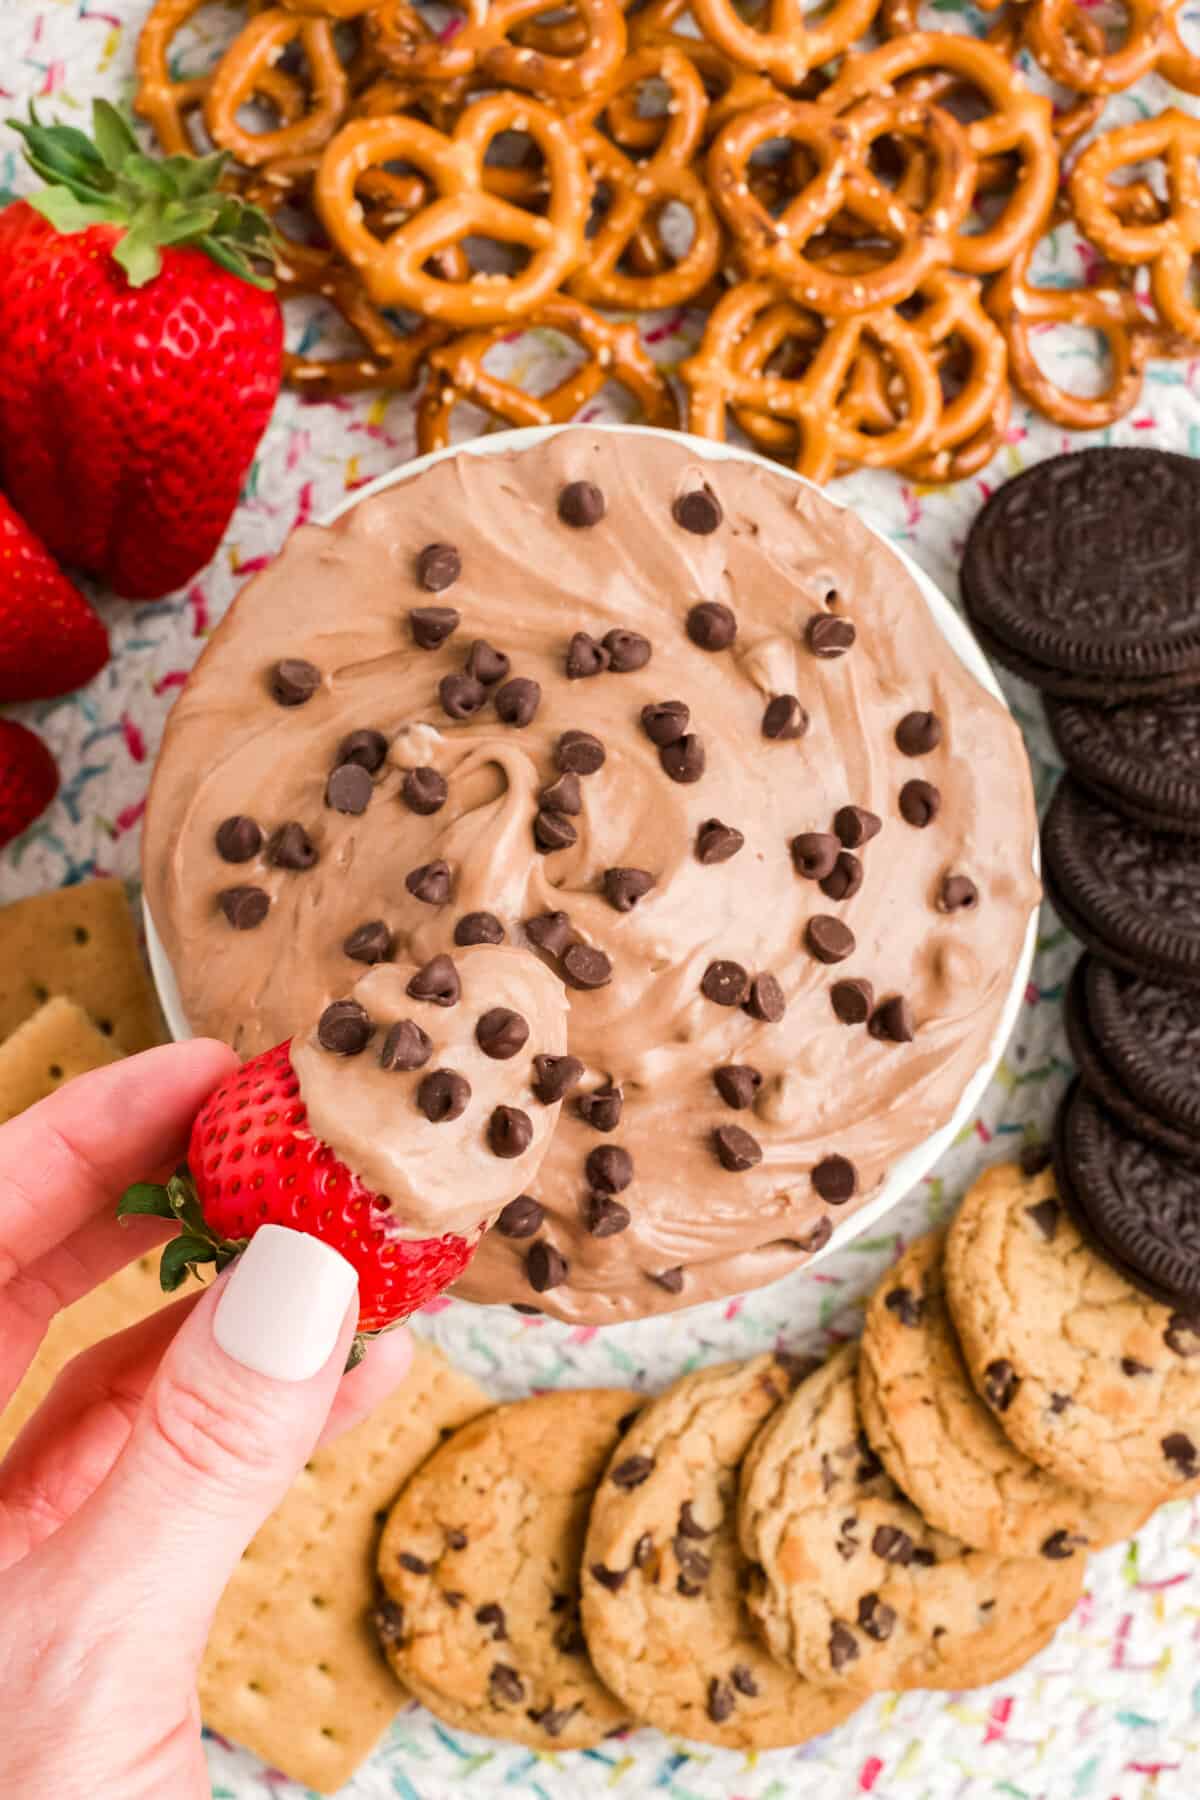 Hand dipping fresh strawberry in brownie batter dip.